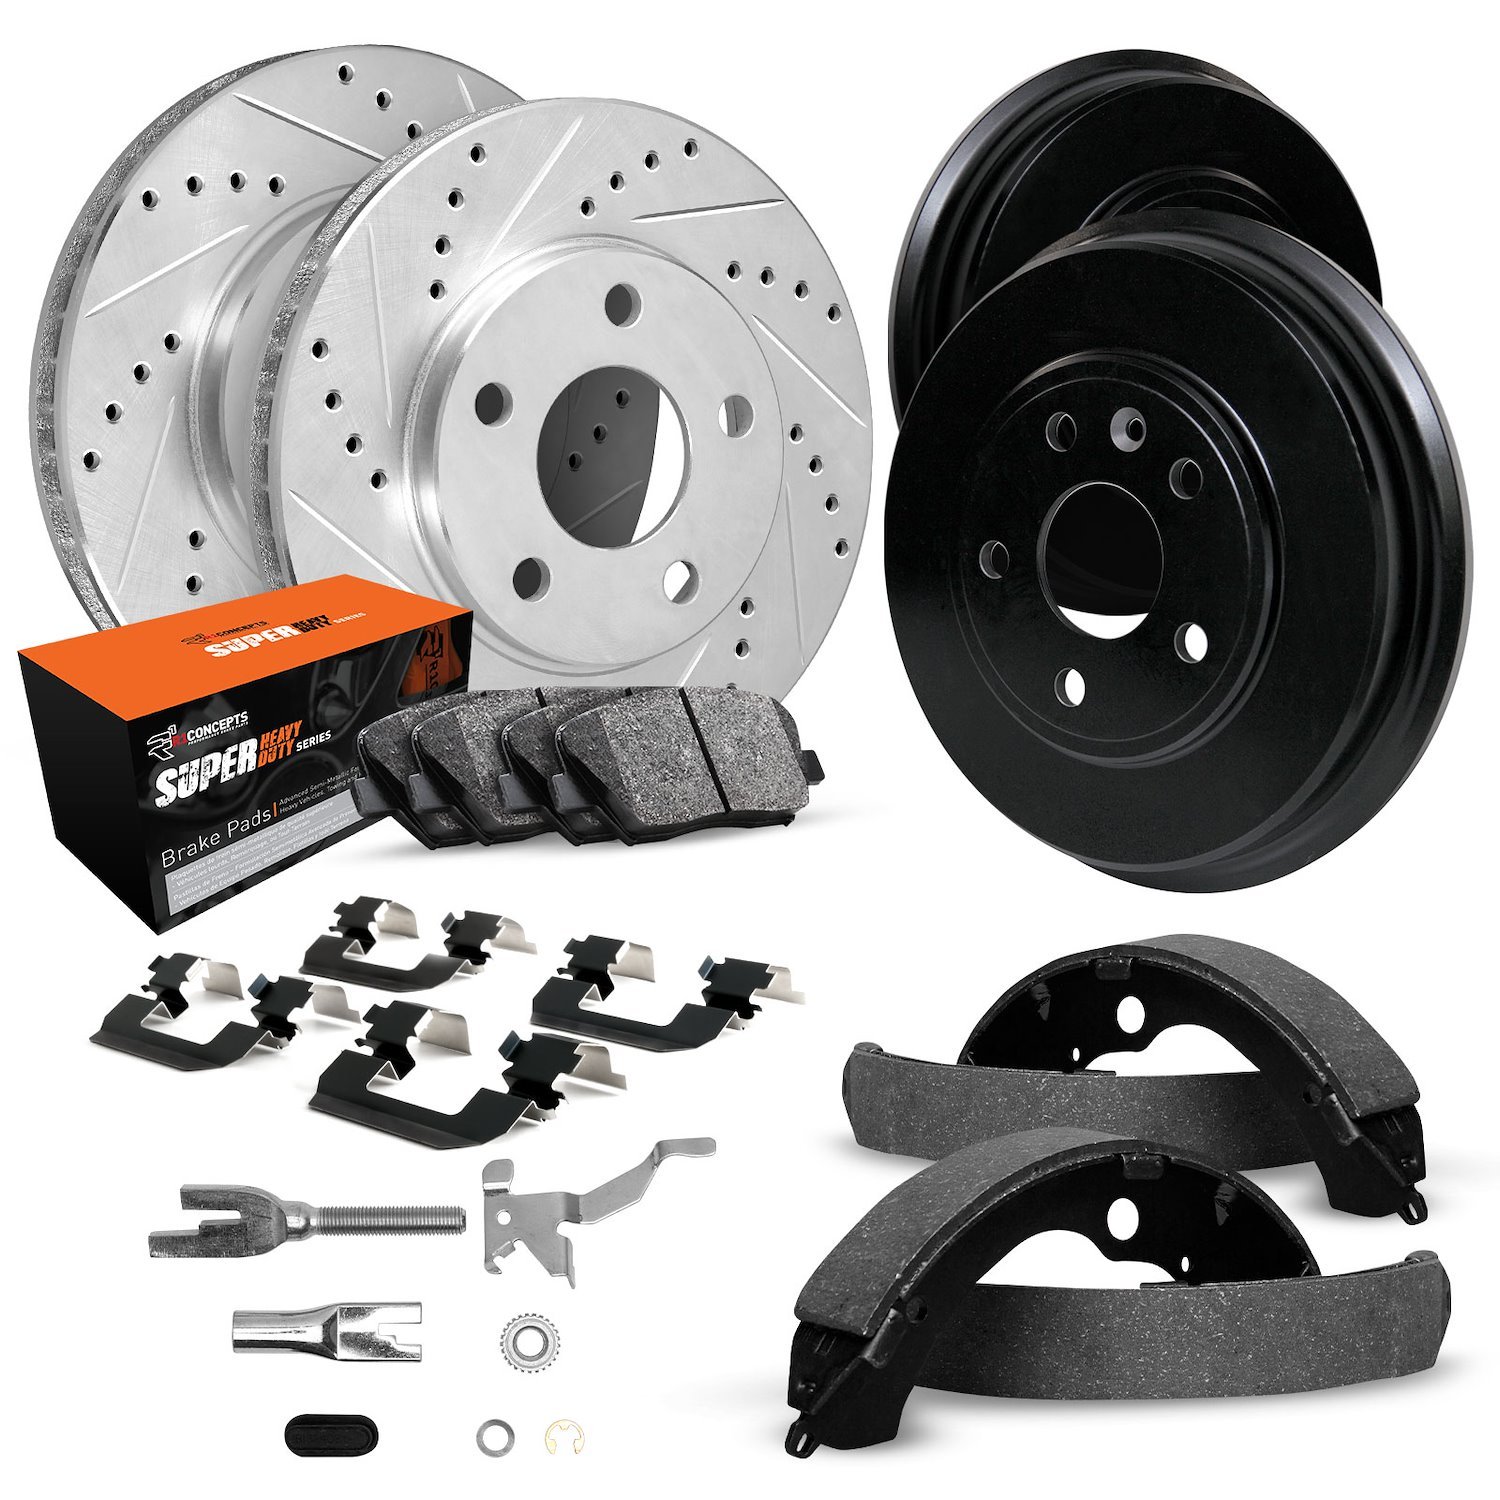 E-Line Drilled/Slotted Silver Rotor & Drum Set w/Super-Duty Pads, Shoes/Hardware/Adjusters, 1974-1979 Ford/Lincoln/Mercury/Mazda